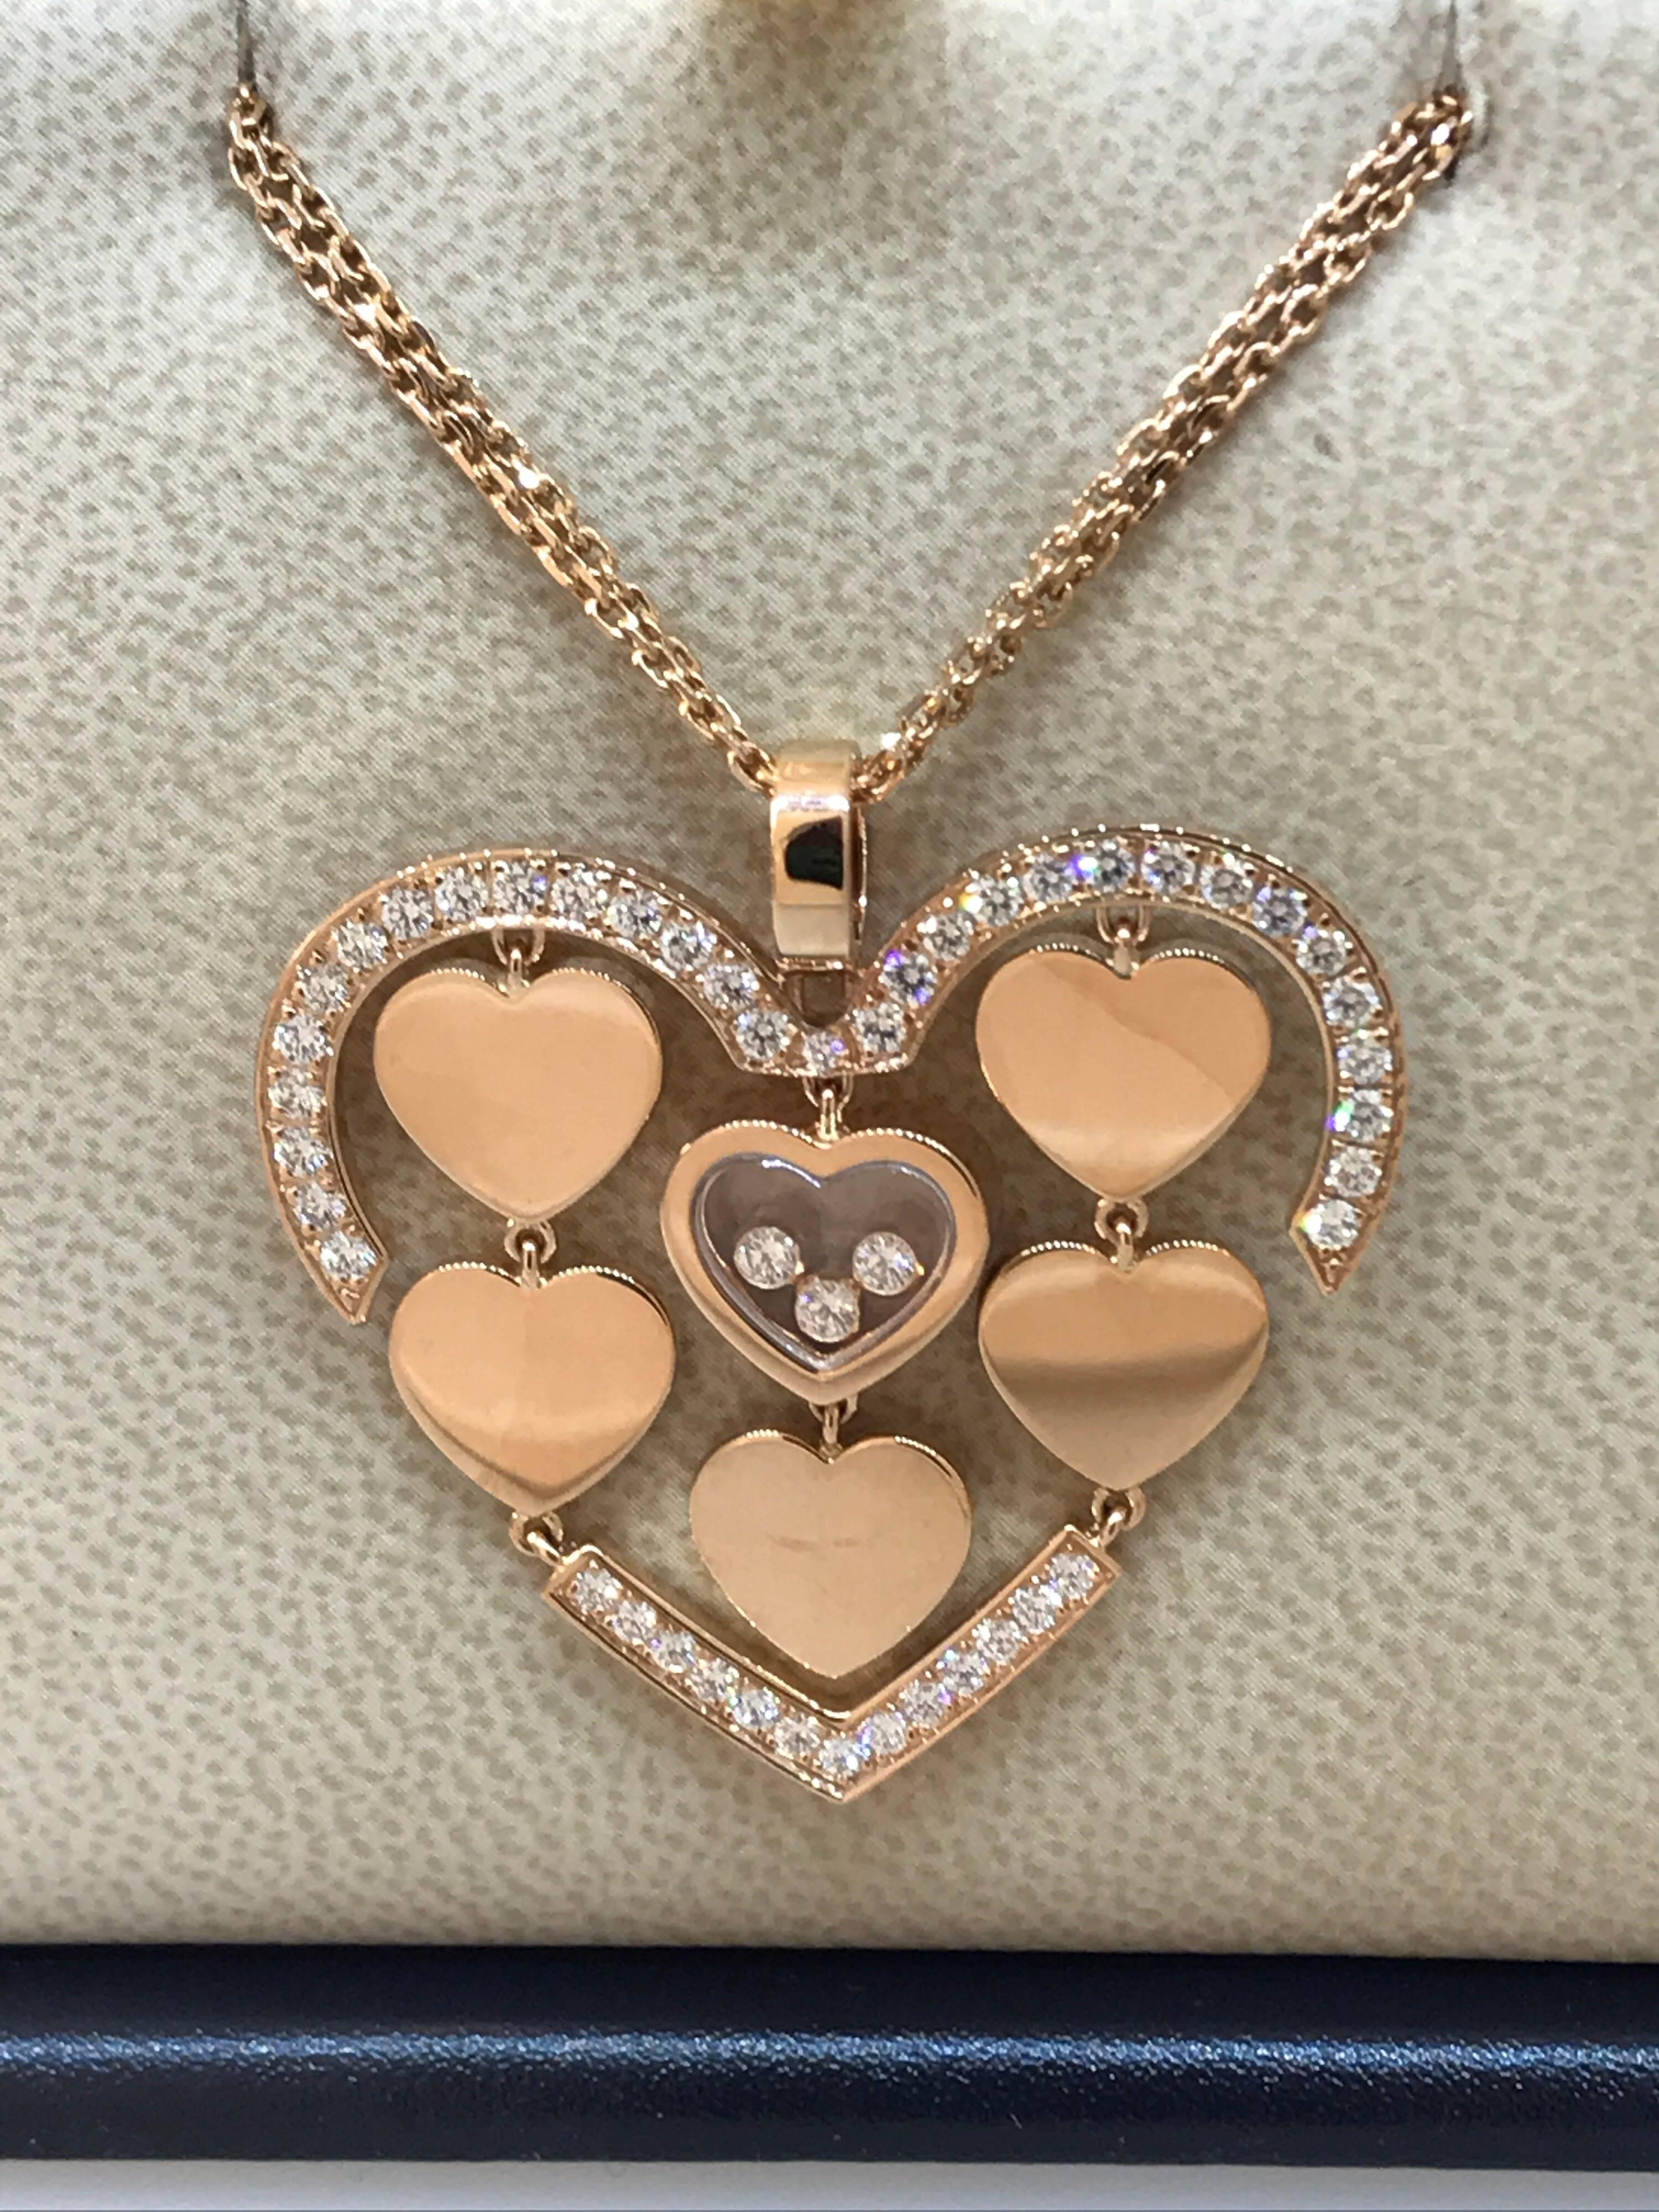 Chopard Amore Hearts Pendant / Necklace

Model Number: 79/7220-5002

100% Authentic

Brand New

Comes with original Chopard box, certificate of authenticity and warranty, and jewels manual

18 Karat Rose Gold (24.60gr)

44 Diamonds on the pendant